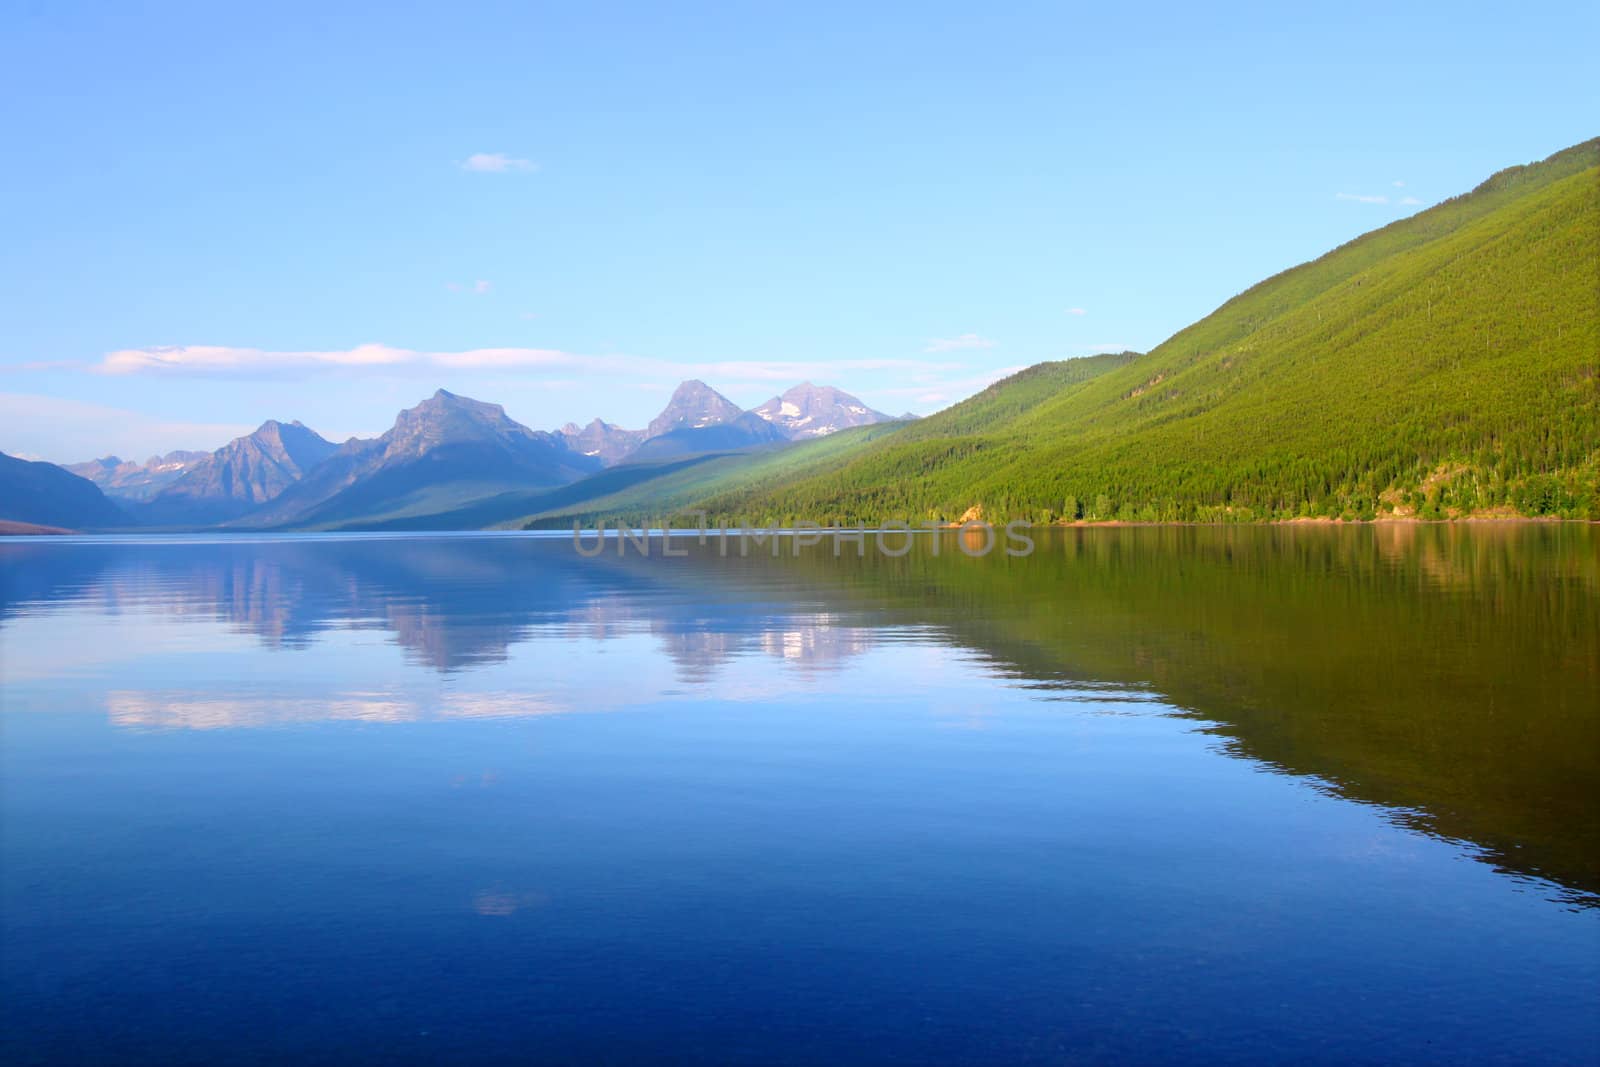 Mountains reflect off Lake McDonald on a calm evening in Glacier National Park.